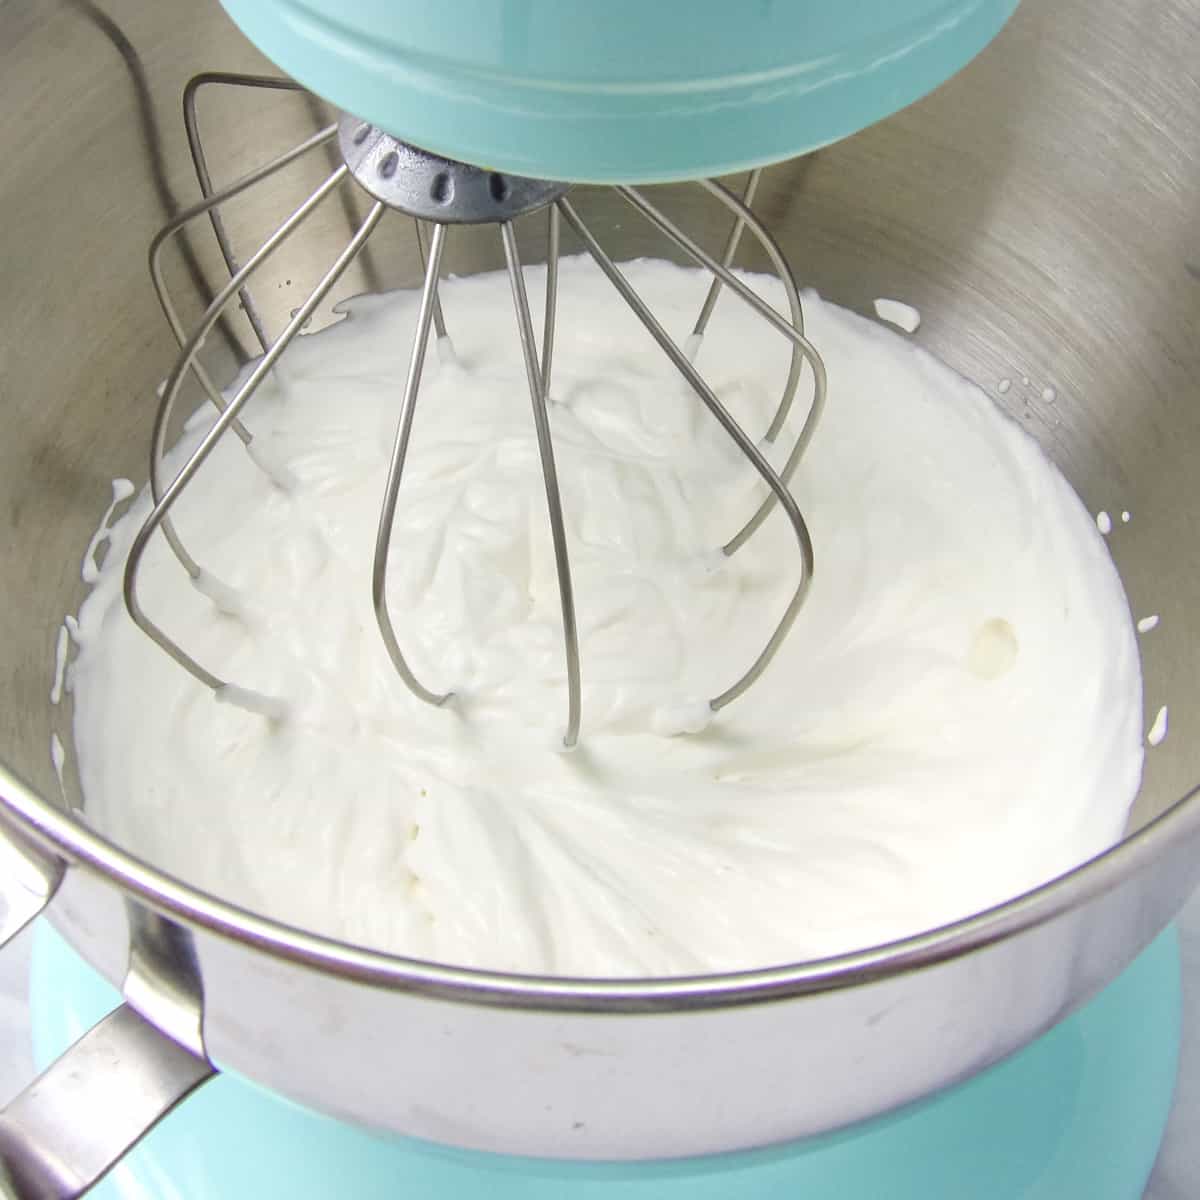 Mixing homemade whipped cream in a blue electric stand mixer fitted with a whisk attachment.